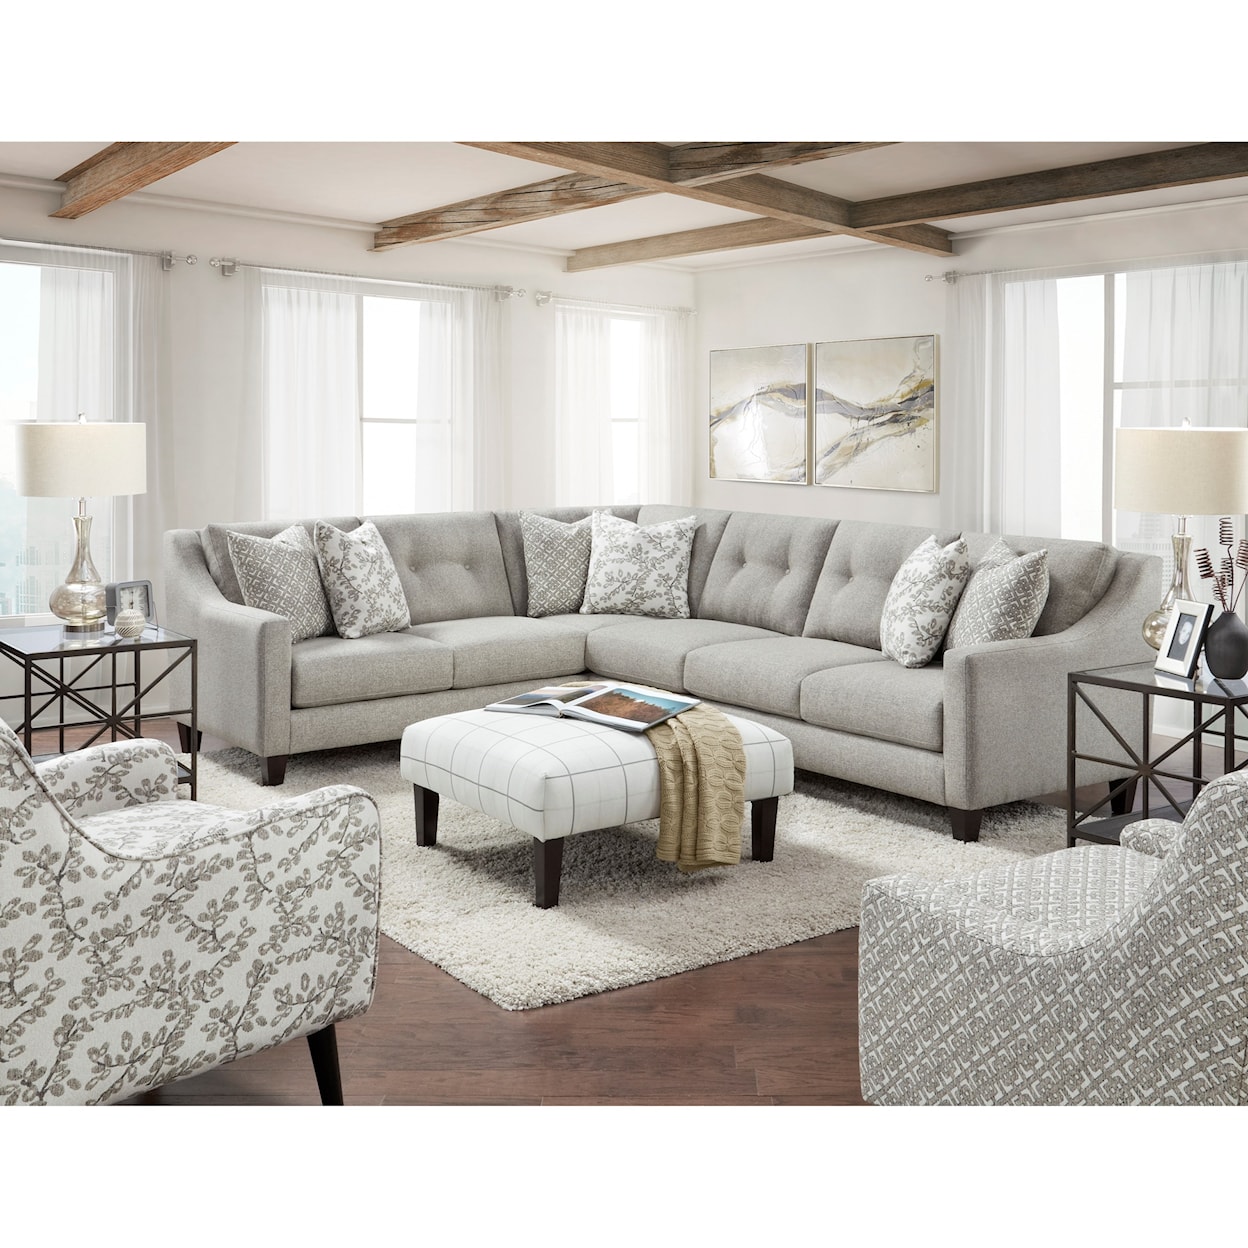 Fusion Furniture 3280B EVENINGS STONE (REVOLUTION) 2-Piece Sectional